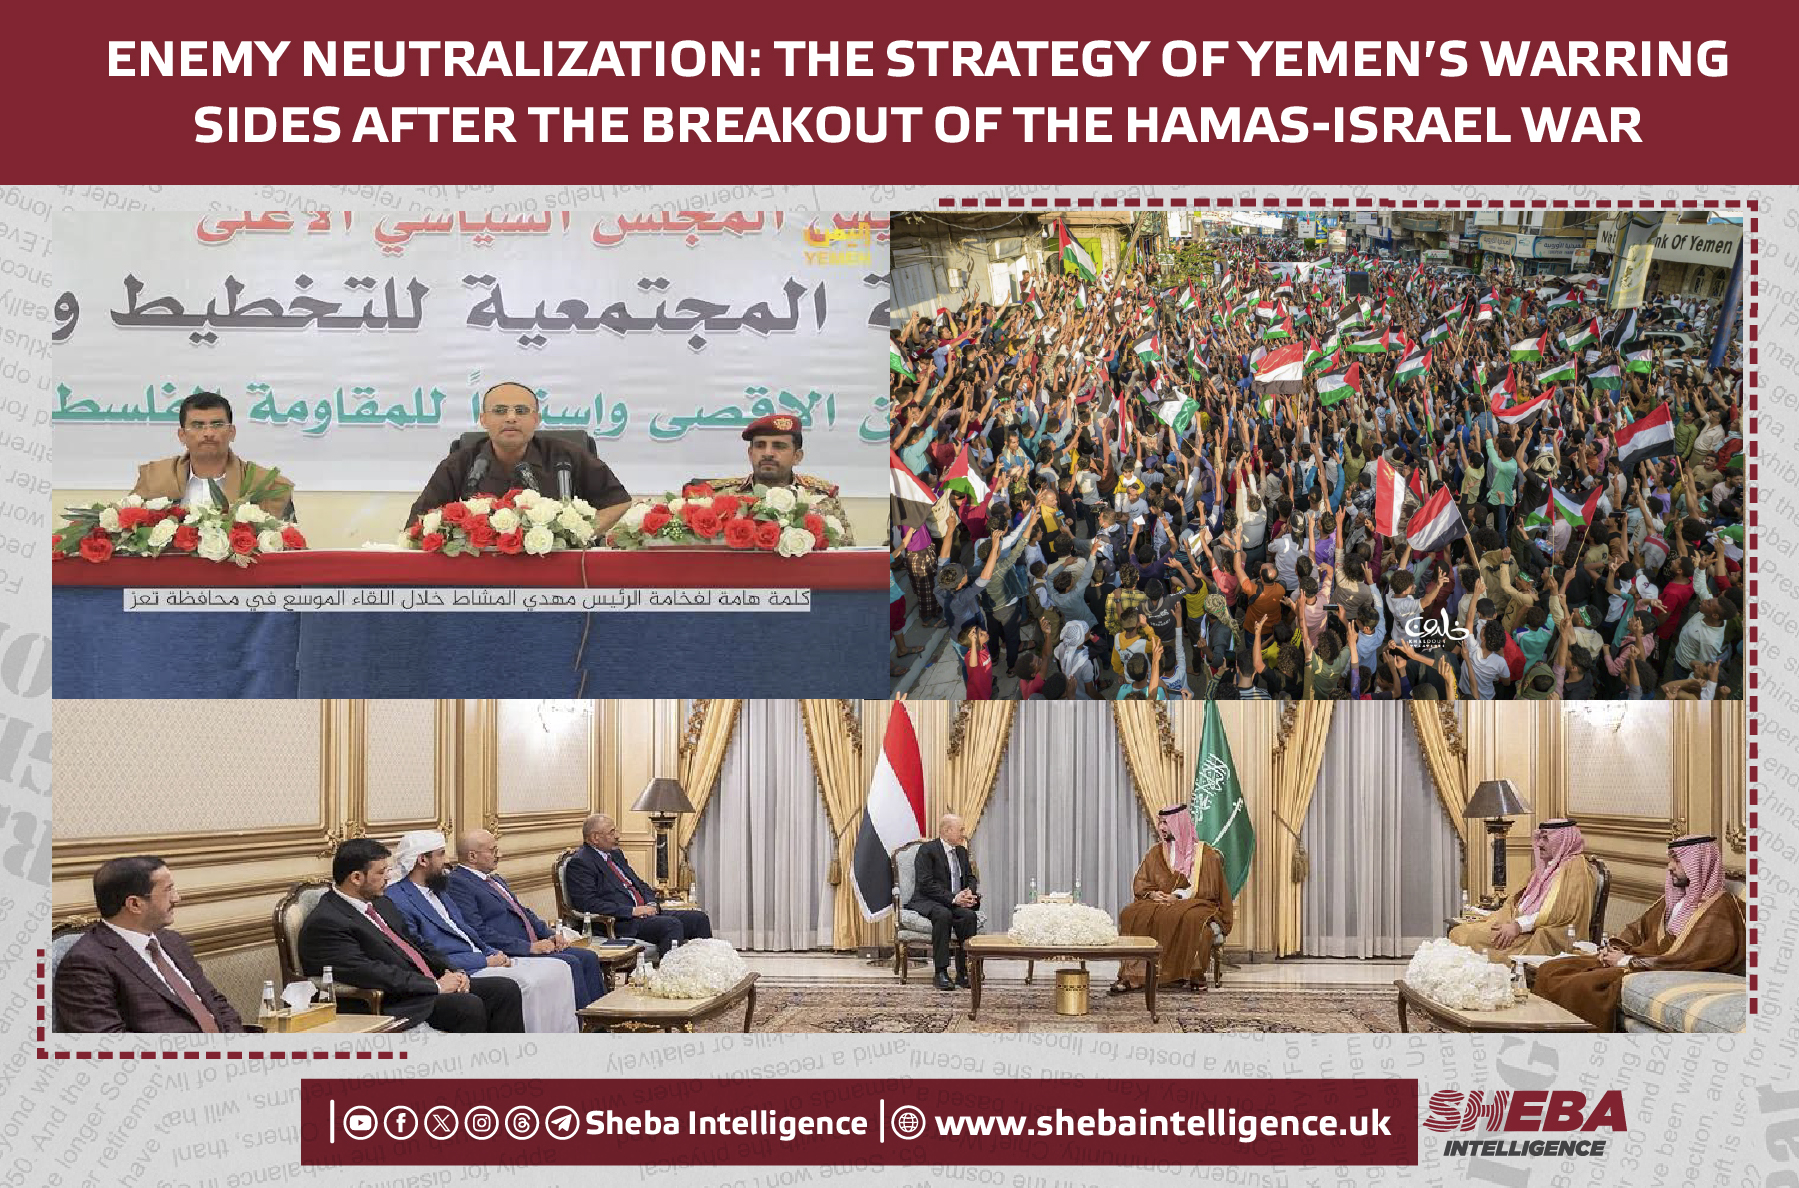 Enemy Neutralization: The Strategy of Yemen's Warring Sides After the Breakout of the Hamas-Israel War